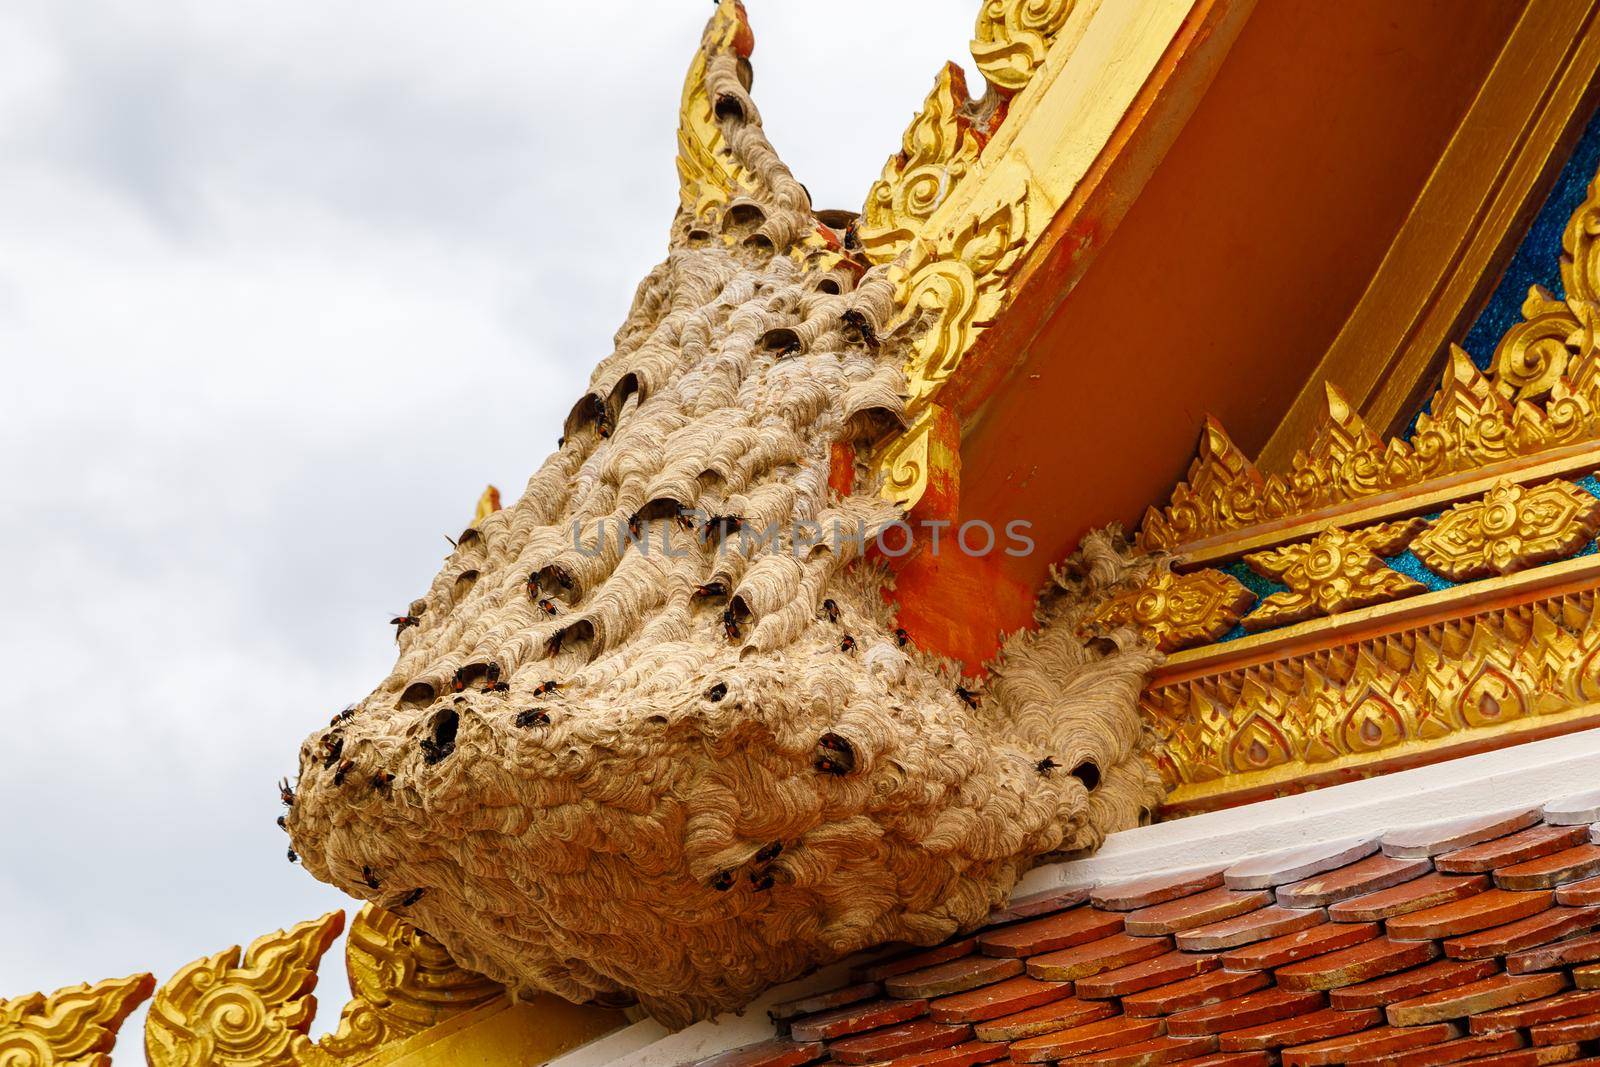 Wasp nest at the edge of the temple roof. Close-up.